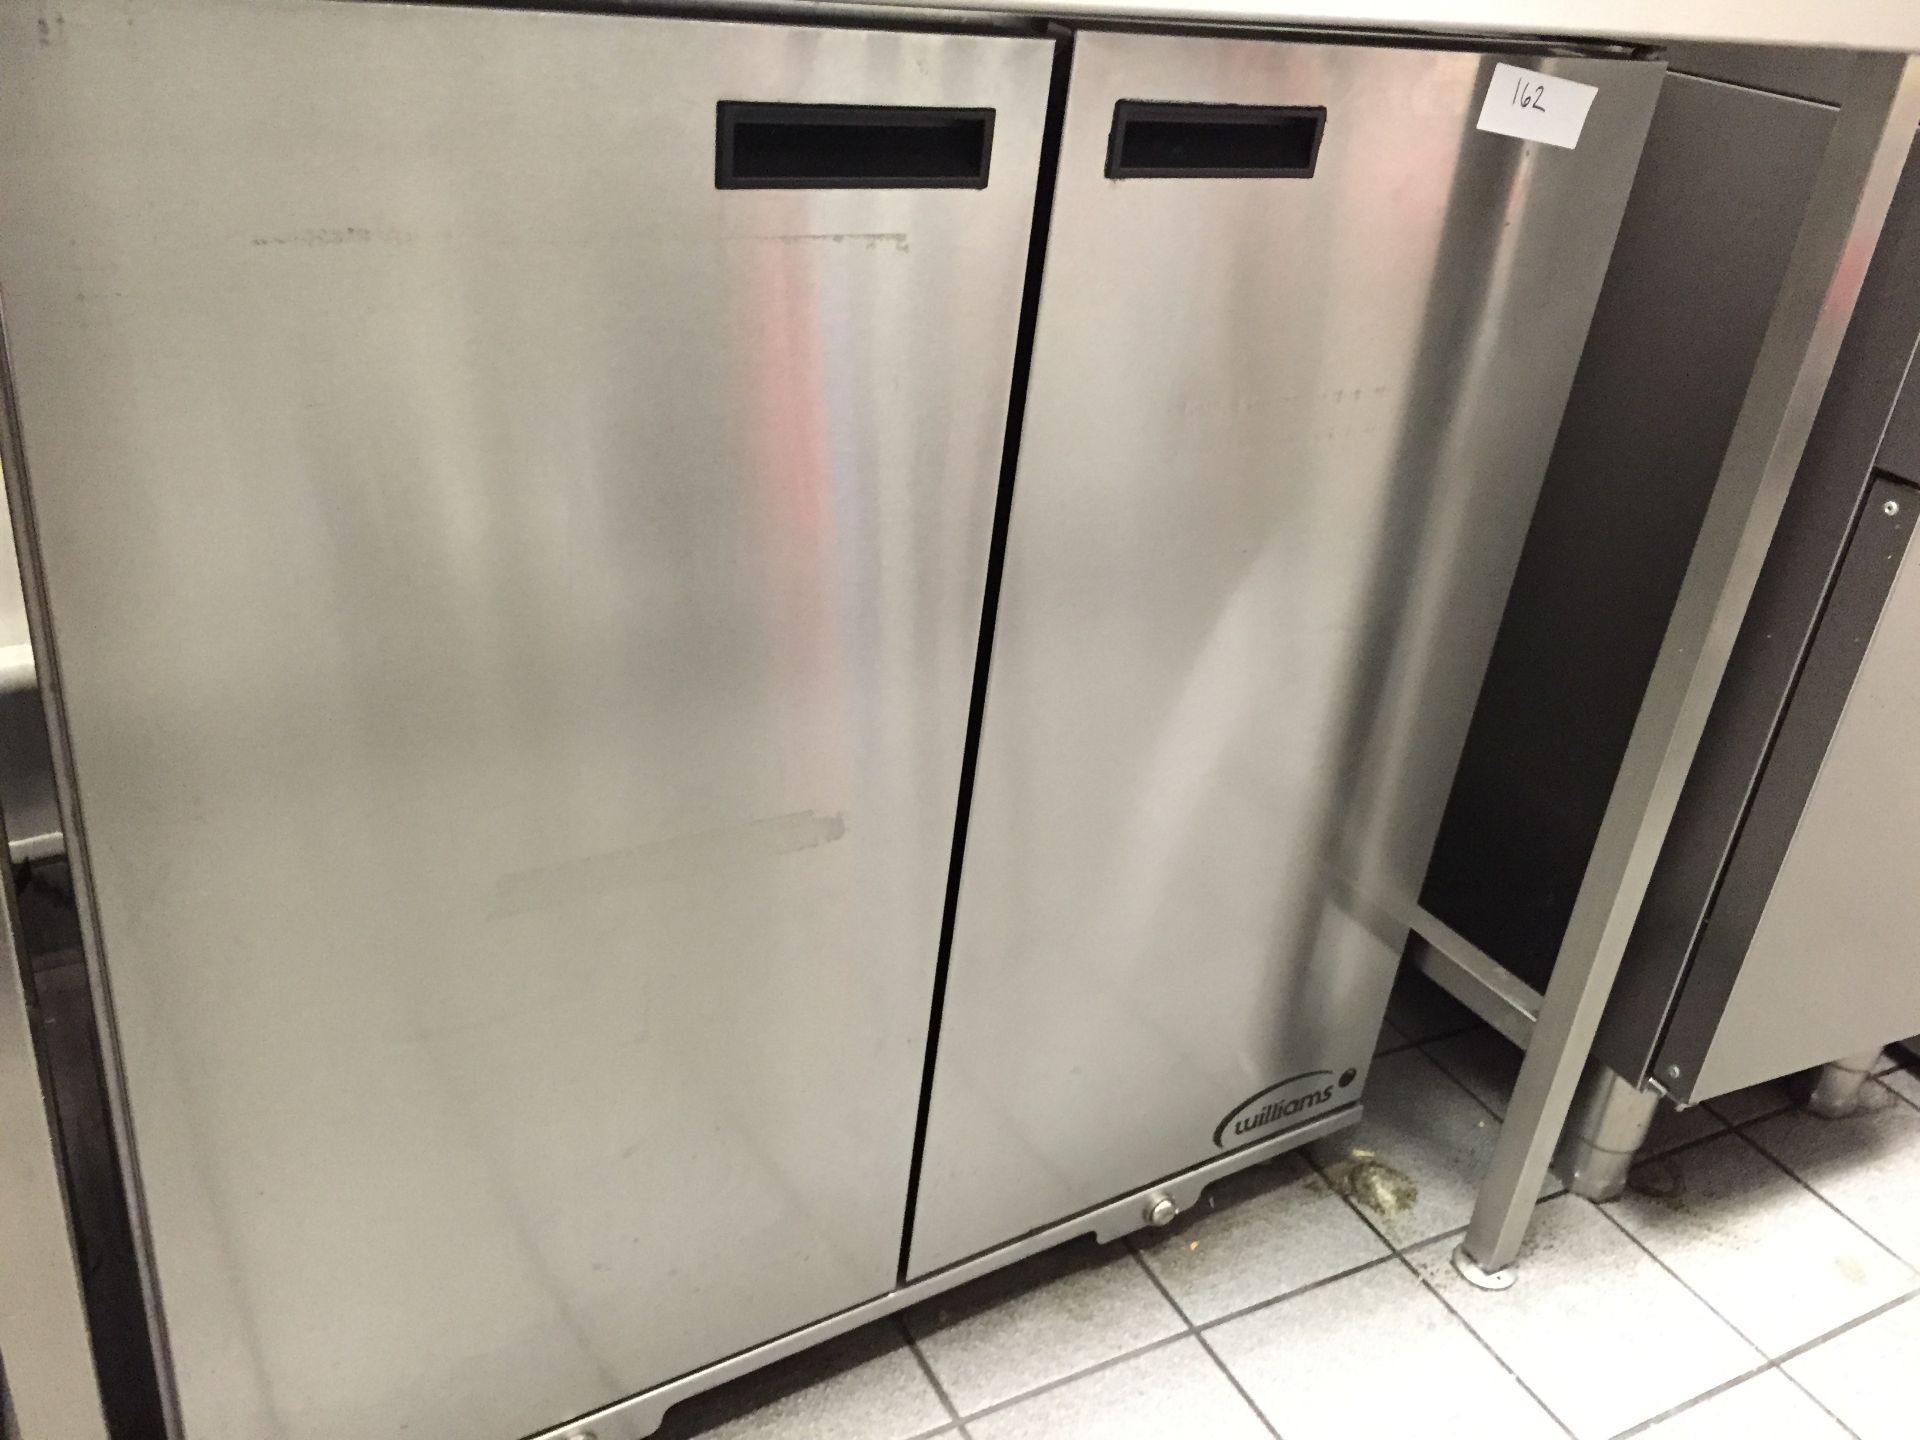 1 x Williams Two Door Commercial Stainless Steel Chiller - Model BC2 SS R1 - 240v -H89 x W89 x D51 - Image 2 of 5